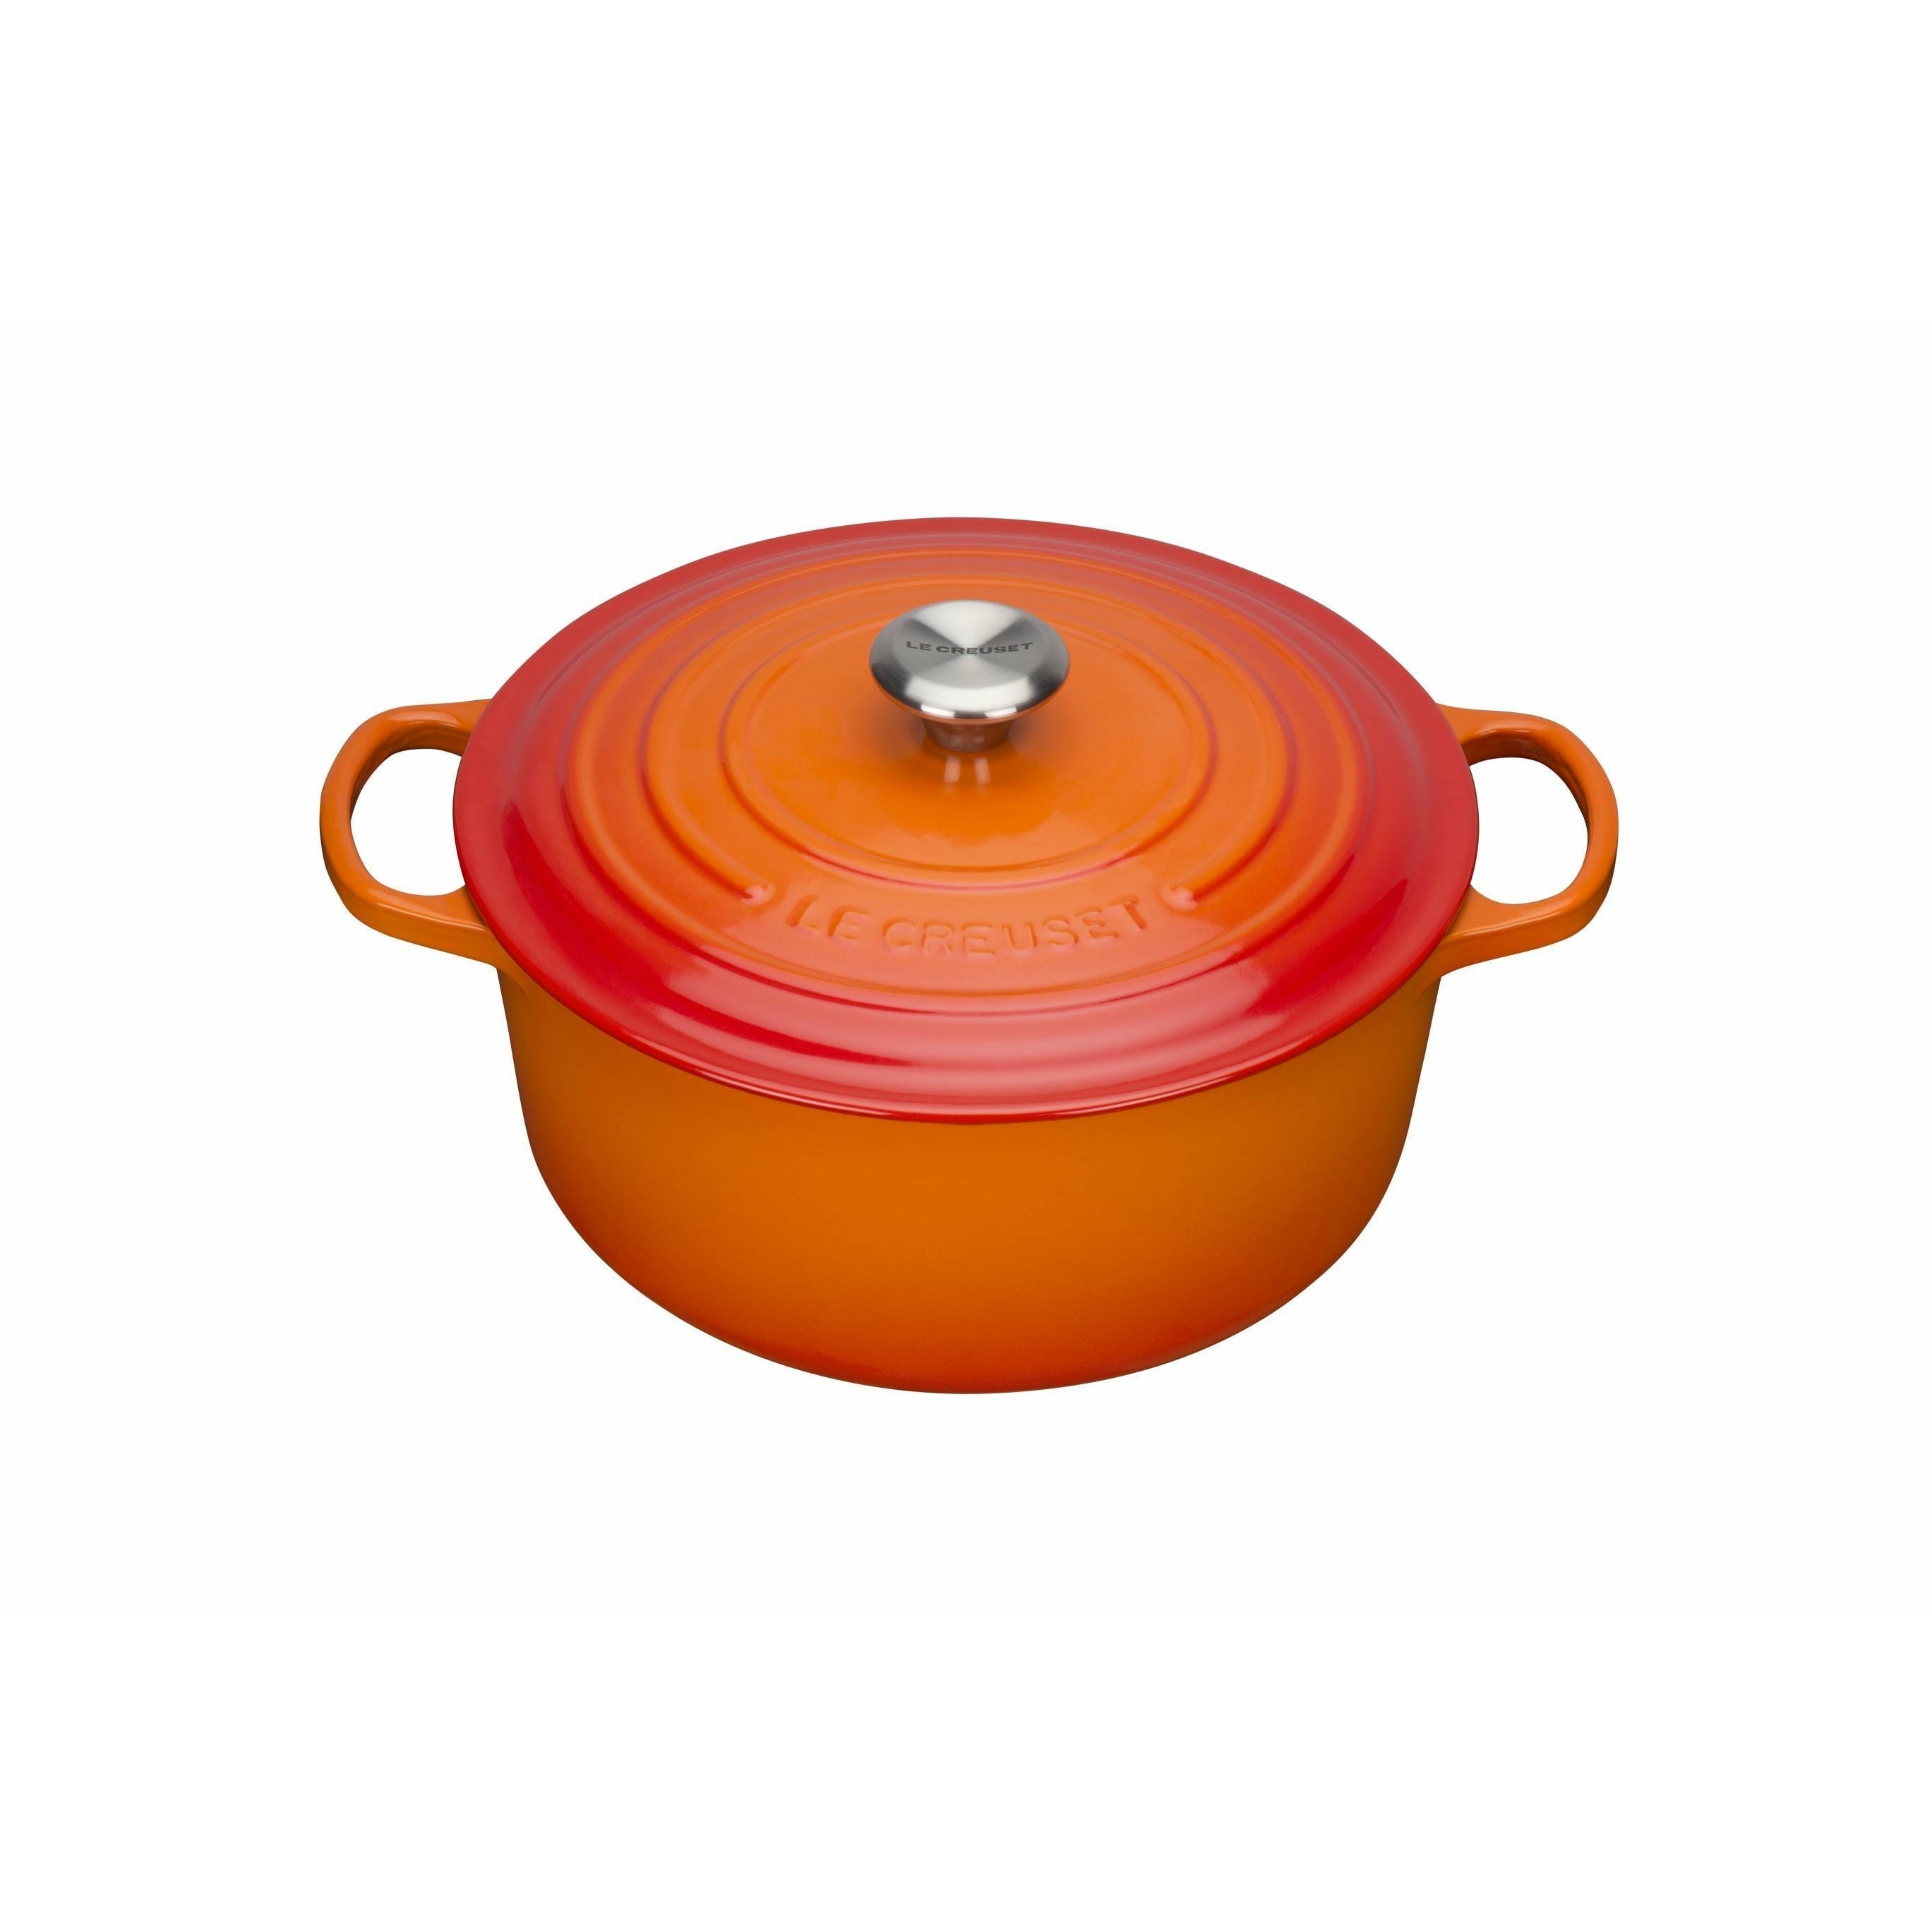 Le Creuset Signature Round Roaster 20 cm, oven rood